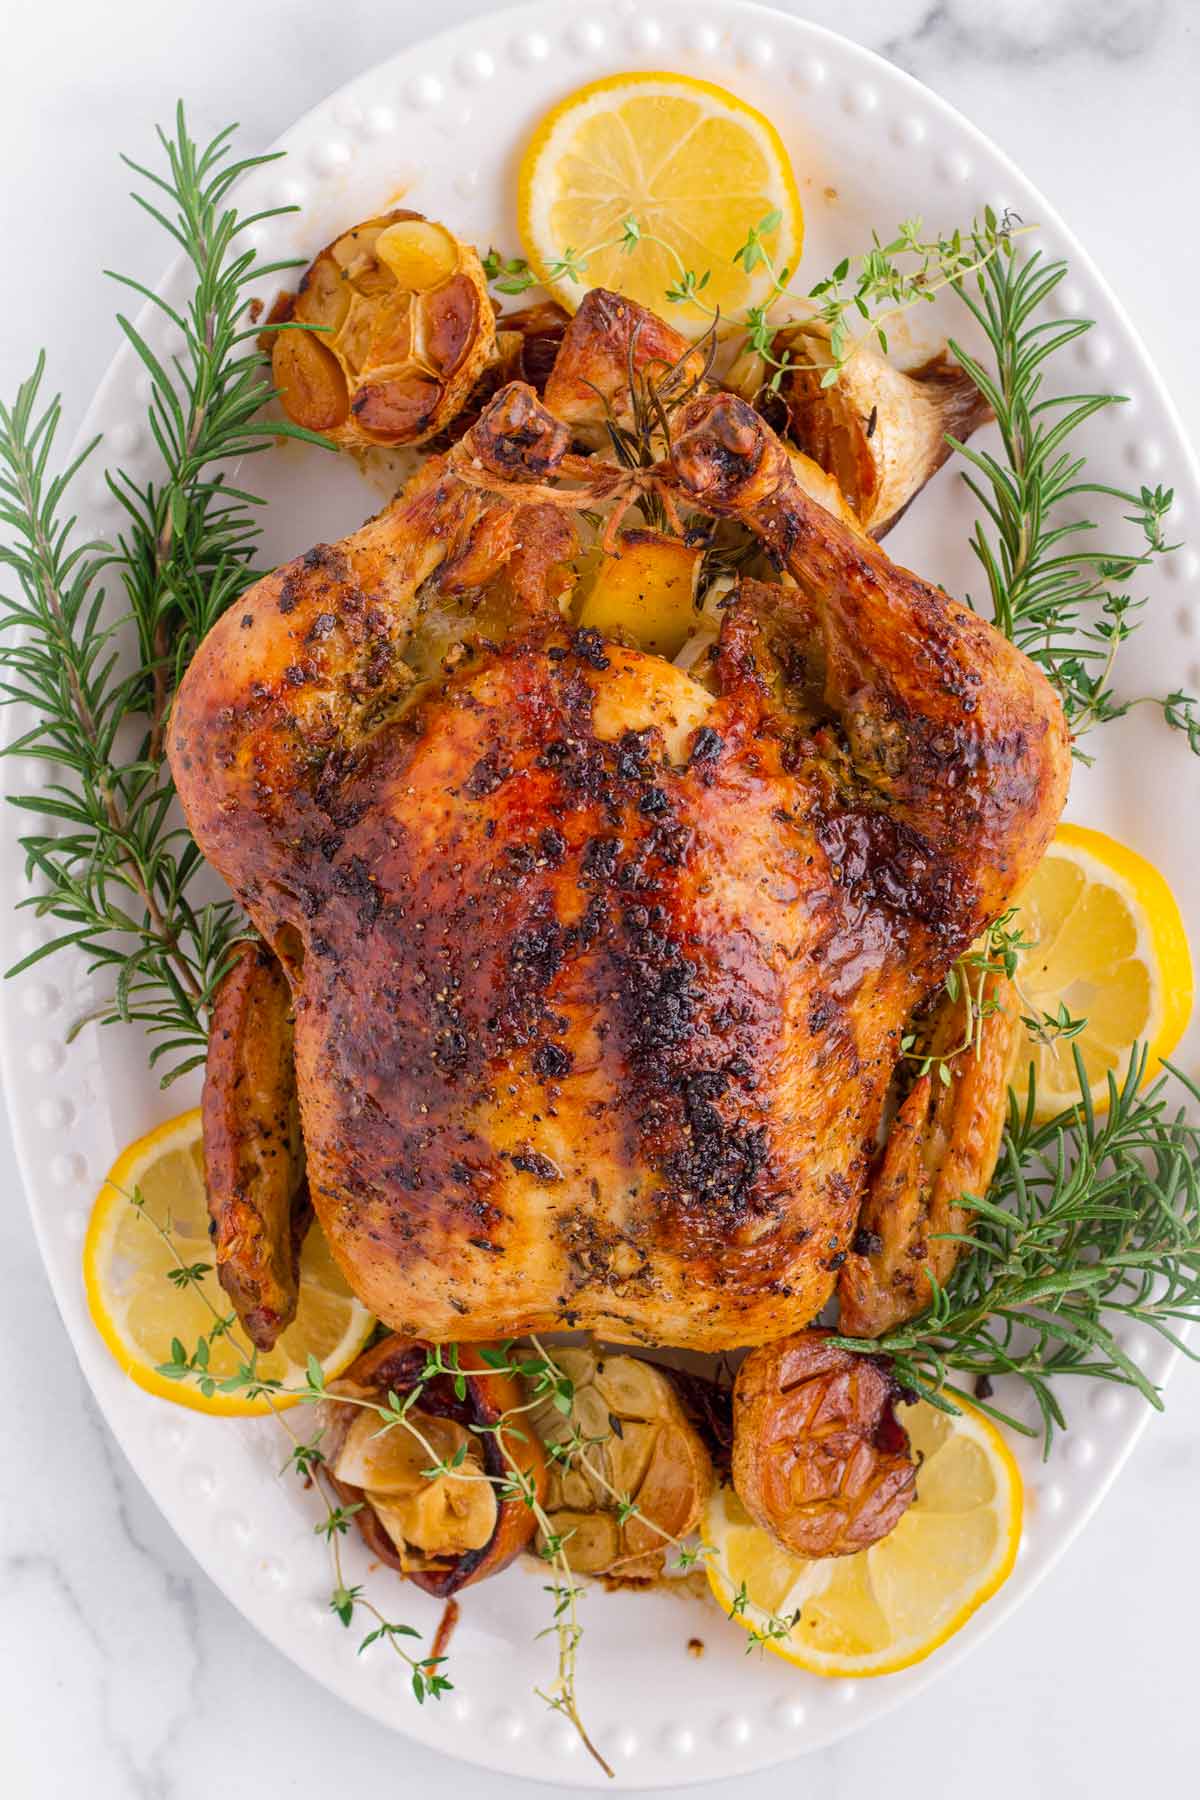 a golden brown whole roasted chicken on a decorated platter